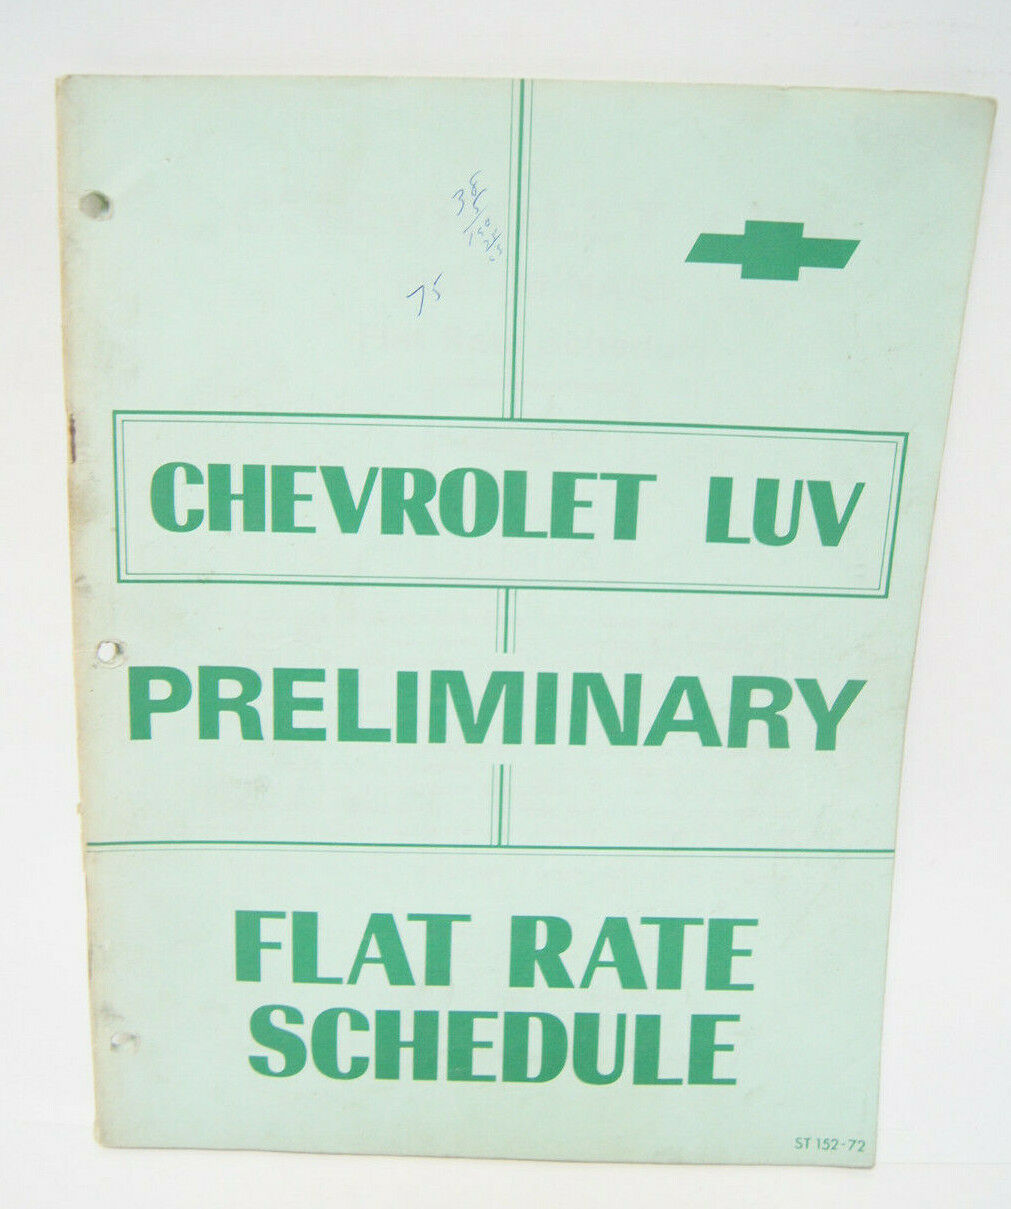 Chevrolet LUV Preliminary Flat Rate Truck Schedule Program Book 1972 ST 152-72